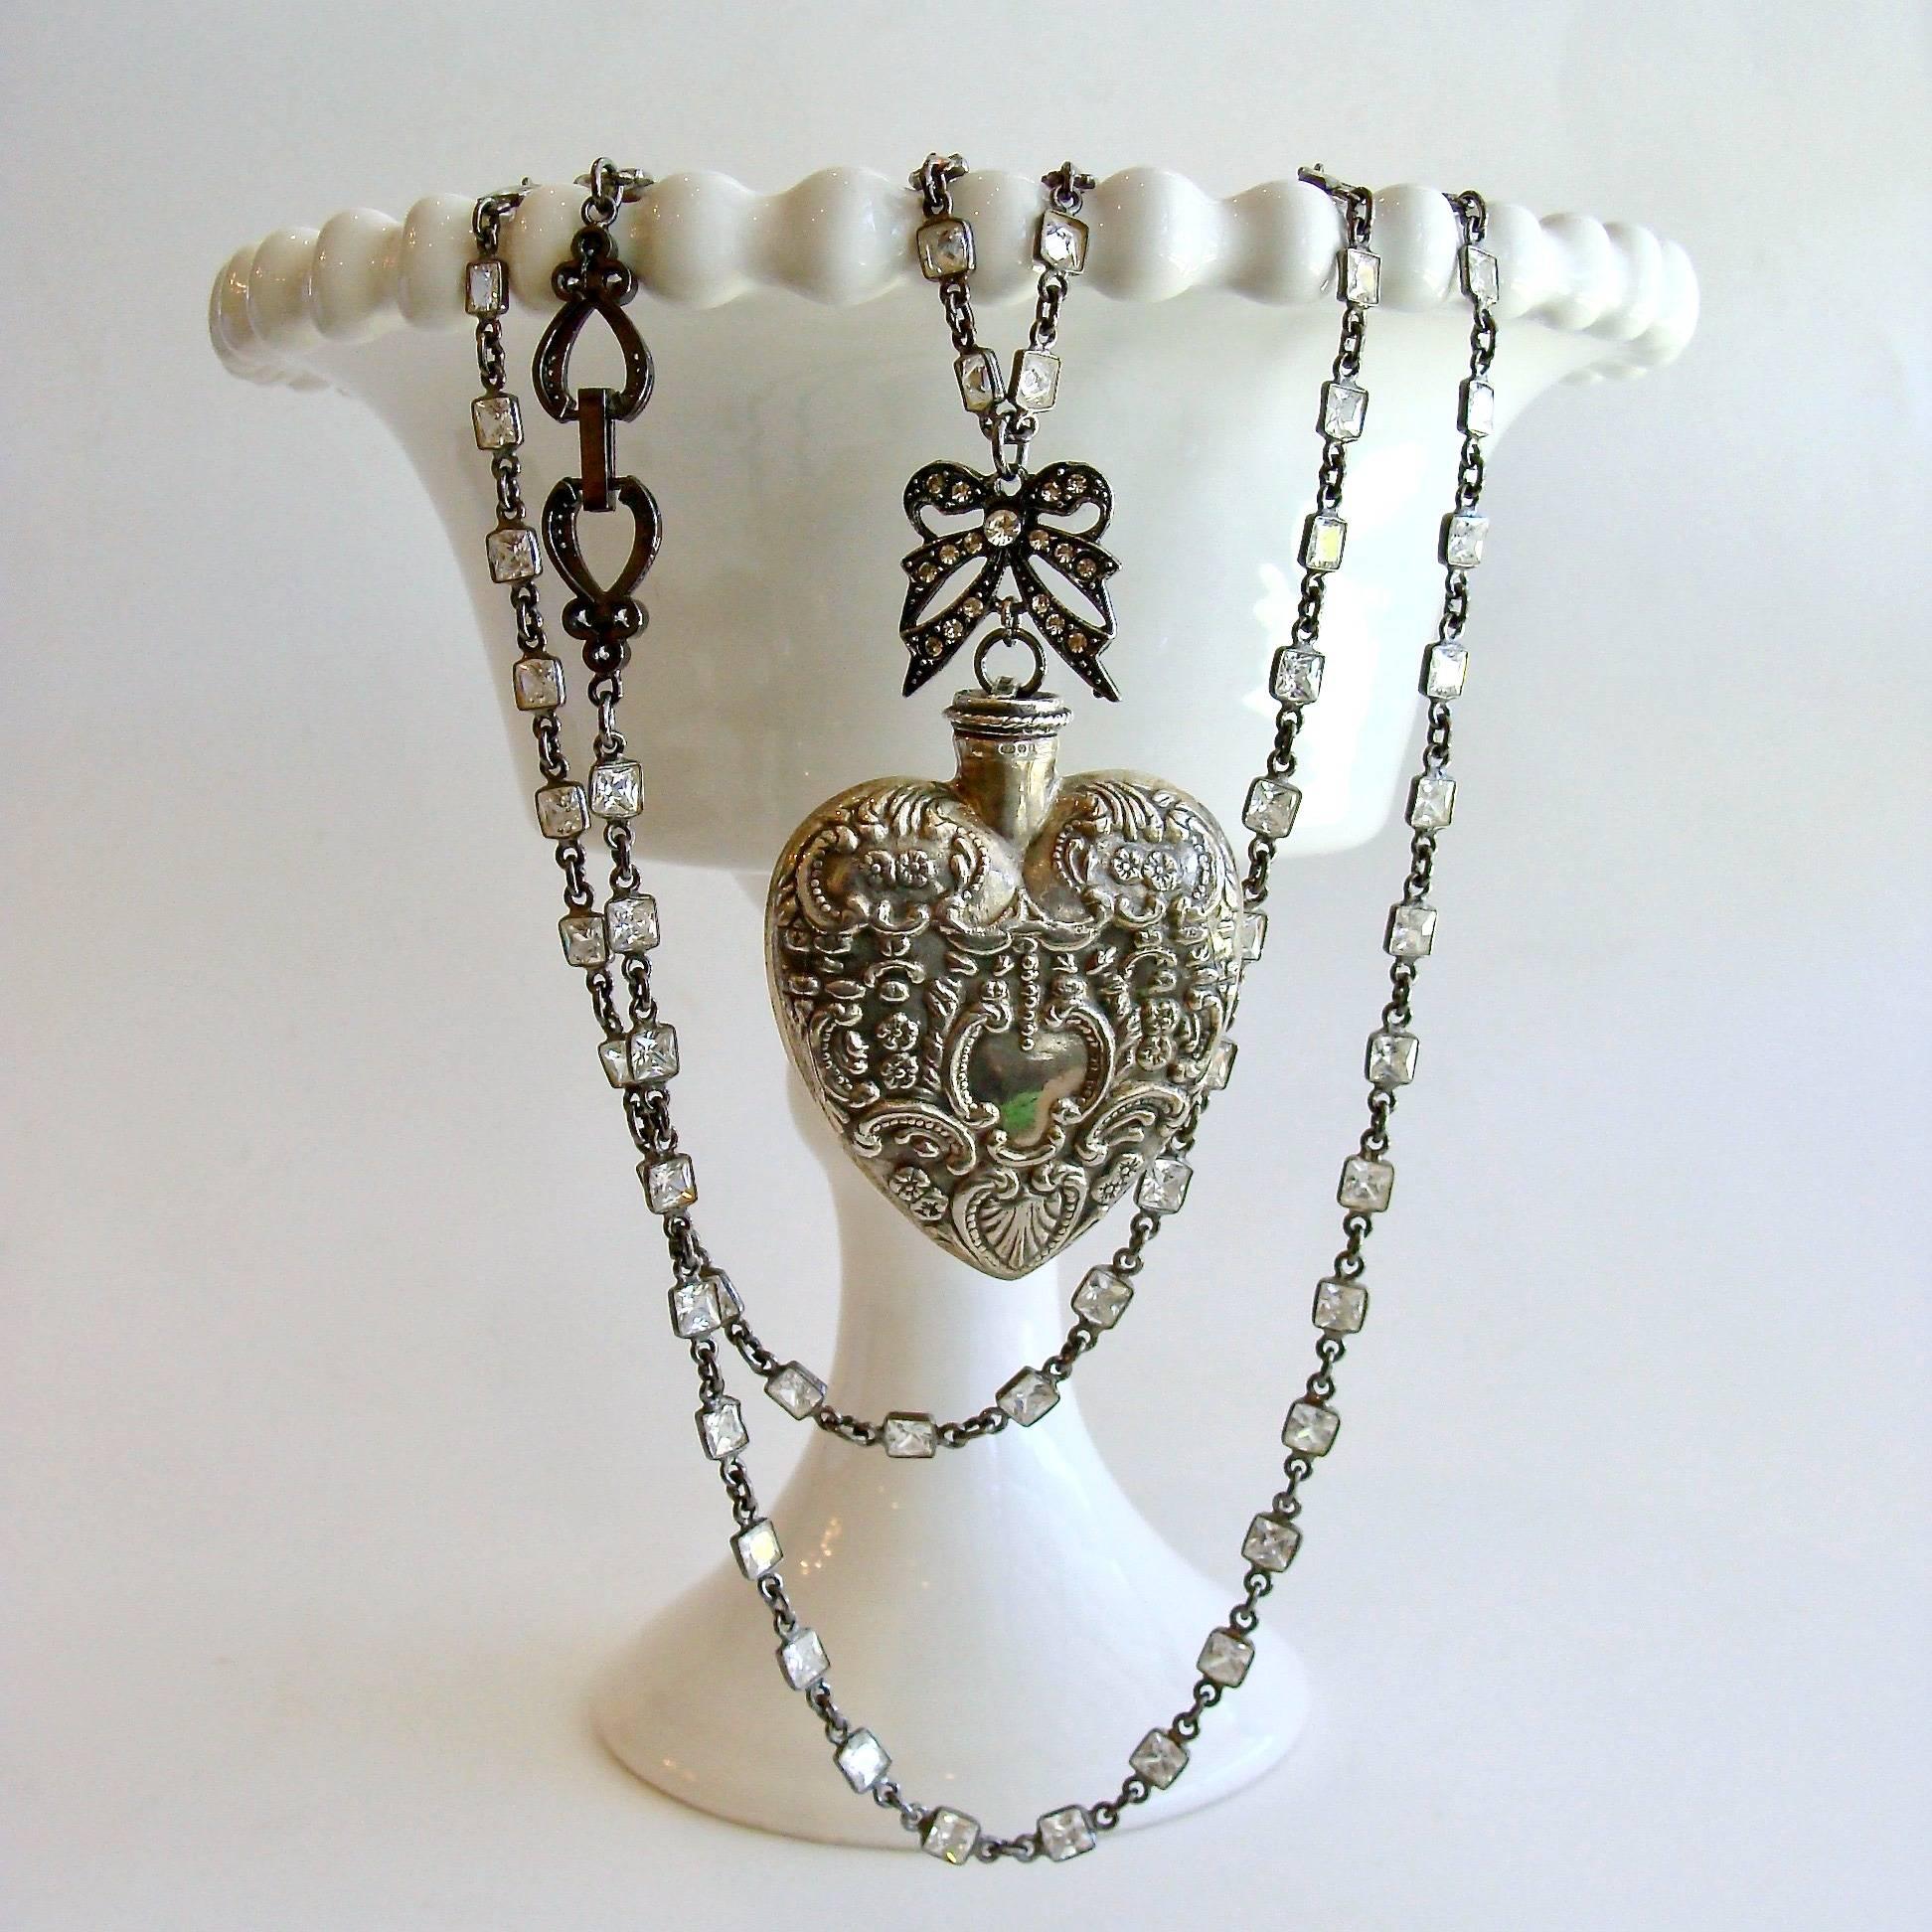 Cressida Necklace.

A lovely antique sterling silver repousse chatelaine heart scent bottle is the focal point of this beautiful layering necklace.  A charming rhodium silver paste bow presides over the top of the feminine heart shaped bottle, while